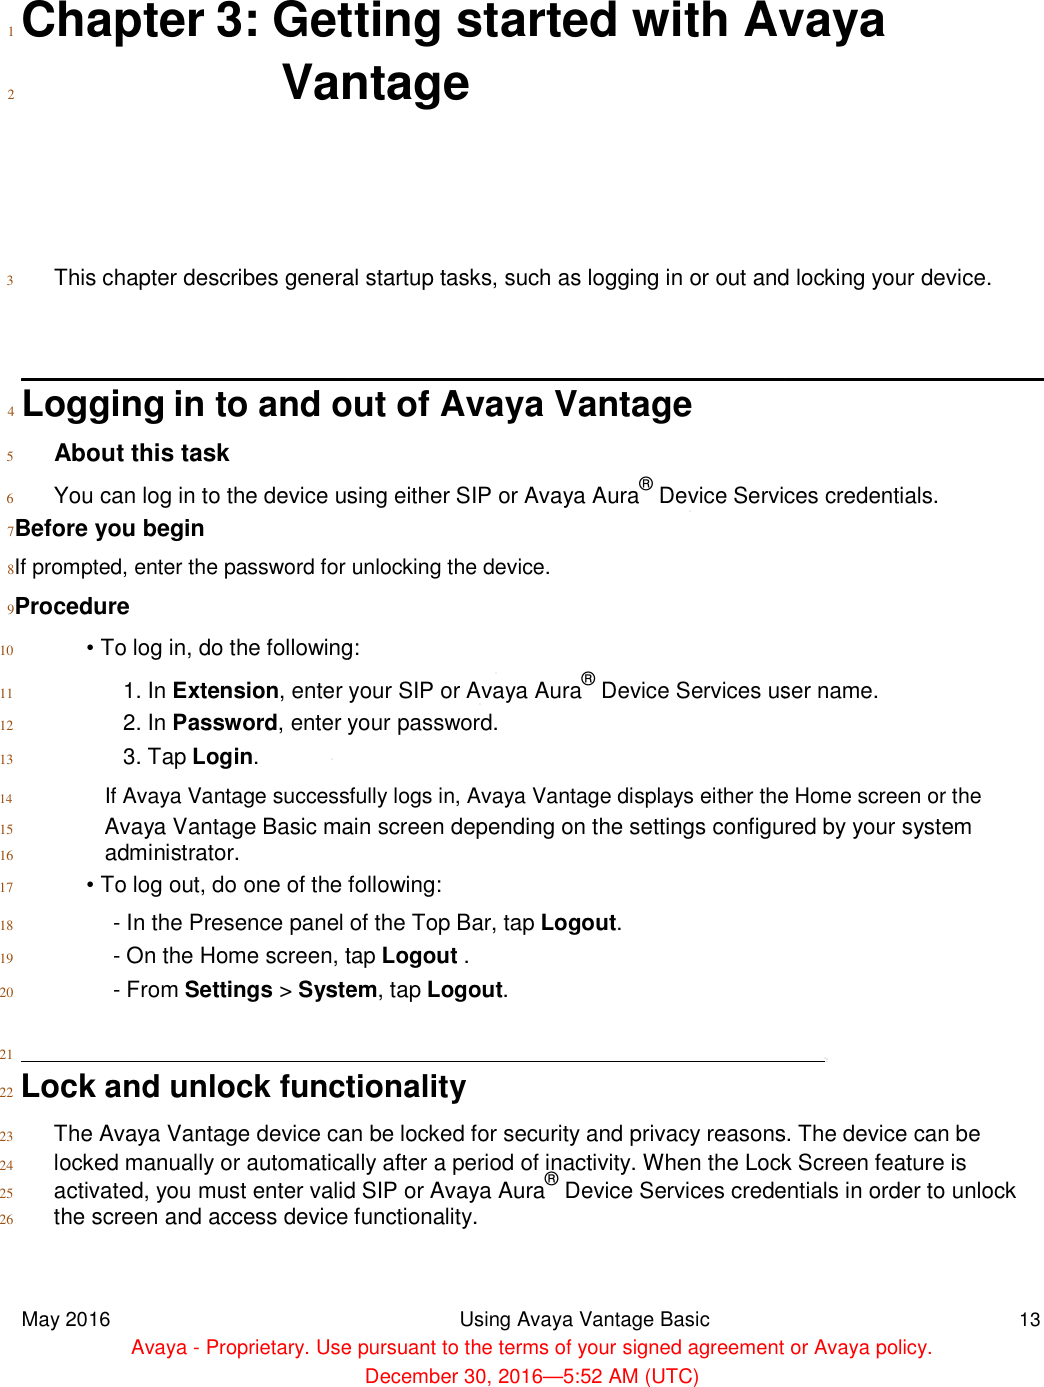   1  Chapter 3: Getting started with Avaya 2 Vantage       3 This chapter describes general startup tasks, such as logging in or out and locking your device.    4  Logging in to and out of Avaya Vantage 5 About this task  6 You can log in to the device using either SIP or Avaya Aura 7Before you begin  8If prompted, enter the password for unlocking the device. 9Procedure  10 • To log in, do the following: 11 1. In Extension, enter your SIP or Avaya Aura 12 2. In Password, enter your password. 13 3. Tap Login.  14 If Avaya Vantage successfully logs in, Avaya Vantage displays either the Home screen or the 15 Avaya Vantage Basic main screen depending on the settings configured by your system 16 administrator.  17 • To log out, do one of the following: 18 - In the Presence panel of the Top Bar, tap  19 - On the Home screen, tap  20 - From Settings &gt; System  21  22  Lock and unlock functionality 23 The Avaya Vantage device can be locked for security and privacy reasons. The device can  24 locked manually or automatically after a period of inactivity. When the Lock Screen feature is 25 activated, you must enter valid SIP or Avaya Aura26 the screen and access device functionality.   May 2016  Avaya - Proprietary. Use pursuant to the terms of your signed agreement or Avaya policy. 3: Getting started with AvayaVantage chapter describes general startup tasks, such as logging in or out and locking your device.in to and out of Avaya Vantage You can log in to the device using either SIP or Avaya Aura® Device Services credentials.If prompted, enter the password for unlocking the device. • To log in, do the following: , enter your SIP or Avaya Aura® Device Services user name., enter your password. Vantage successfully logs in, Avaya Vantage displays either the Home screen or theAvaya Vantage Basic main screen depending on the settings configured by your system• To log out, do one of the following: In the Presence panel of the Top Bar, tap Logout. On the Home screen, tap Logout . System, tap Logout. and unlock functionality The Avaya Vantage device can be locked for security and privacy reasons. The device can locked manually or automatically after a period of inactivity. When the Lock Screen feature isactivated, you must enter valid SIP or Avaya Aura® Device Services credentials in order to unlockthe screen and access device functionality. Using Avaya Vantage Basic Proprietary. Use pursuant to the terms of your signed agreement or Avaya policy.December 30, 2016—5:52 AM (UTC) 3: Getting started with Avaya chapter describes general startup tasks, such as logging in or out and locking your device. Device Services credentials. Device Services user name. Vantage successfully logs in, Avaya Vantage displays either the Home screen or the Avaya Vantage Basic main screen depending on the settings configured by your system The Avaya Vantage device can be locked for security and privacy reasons. The device can be locked manually or automatically after a period of inactivity. When the Lock Screen feature is Device Services credentials in order to unlock 13 Proprietary. Use pursuant to the terms of your signed agreement or Avaya policy. 